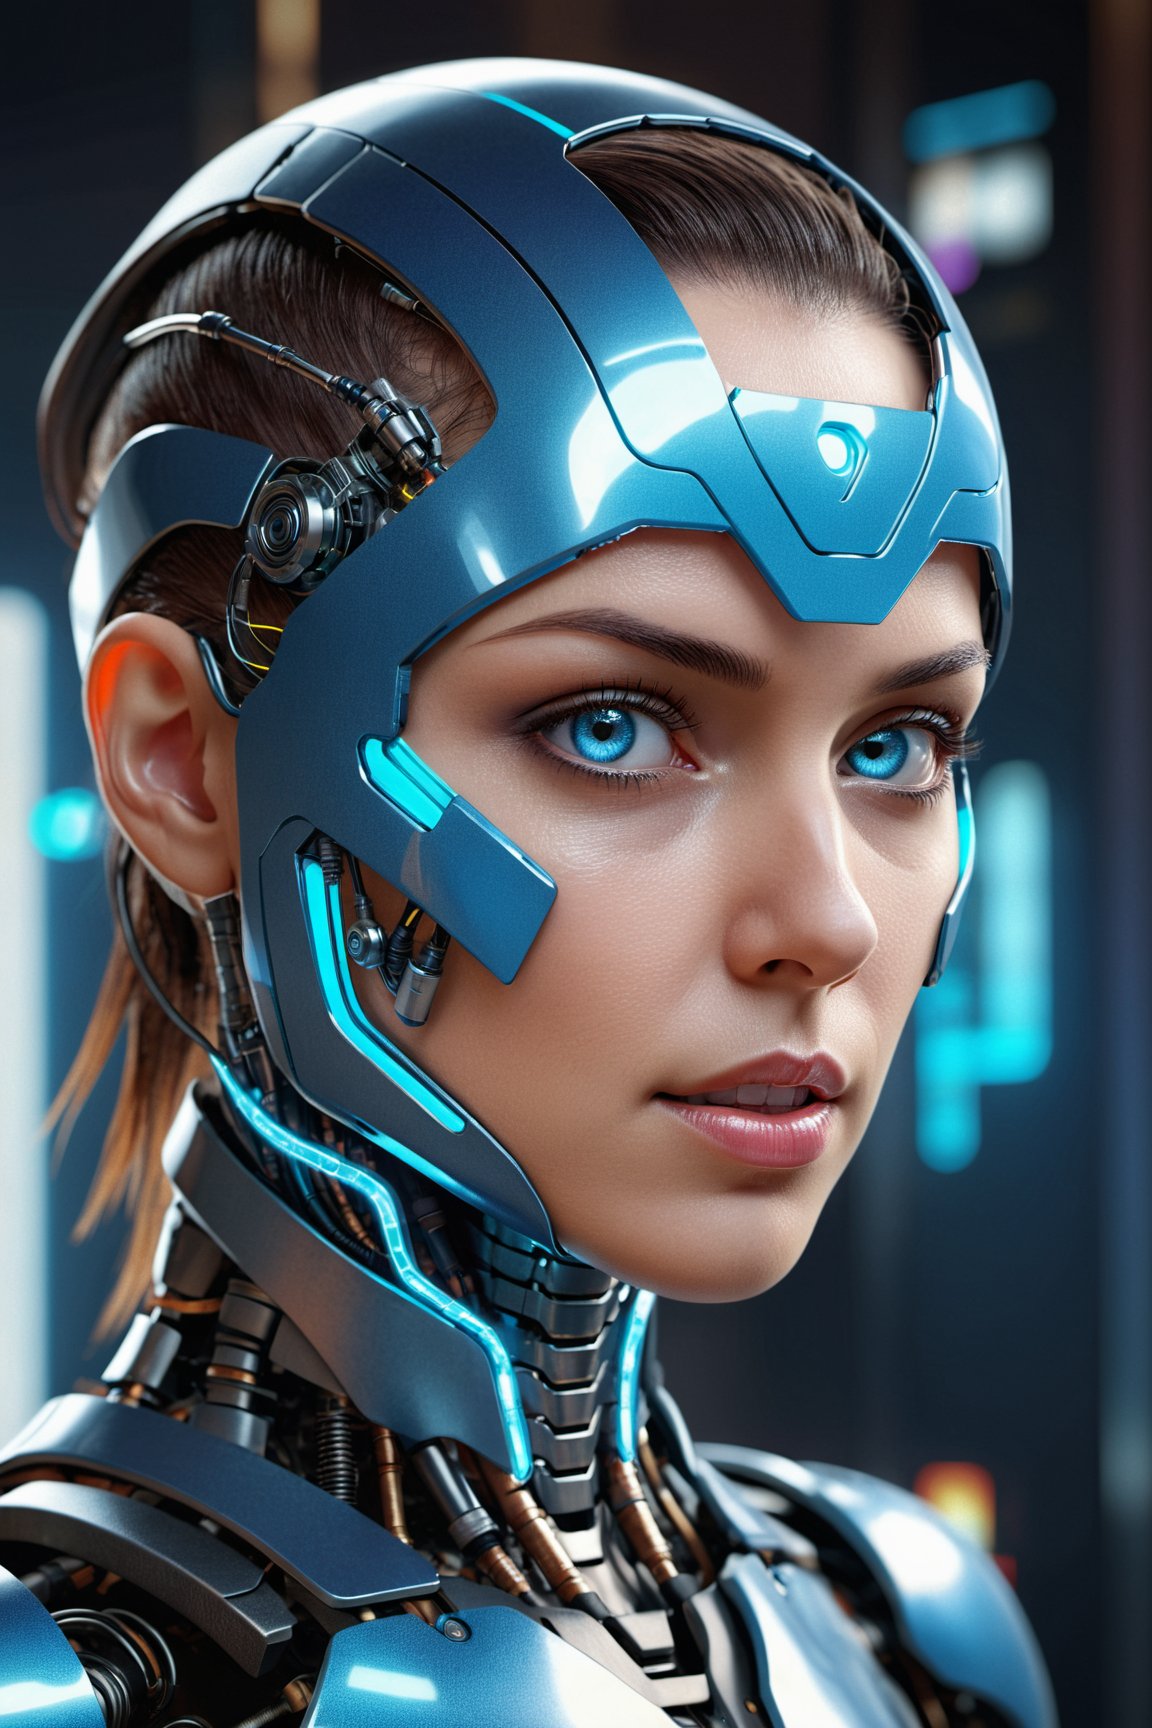 (best quality,4k,8k,highres,masterpiece:1.2),ultra-detailed,(realistic,photorealistic,photo-realistic:1.37),3D rendered,powerful robotic features,elegant face structure,vivid synthetic skin,illuminated parts,mirror-like porcelain texture,meticulous attention to detail,futuristic hairstyle,glowing cybernetic eyes,metallic accents,delicate facial expressions,sophisticated mechanical ornaments,slightly tilted head angle,electric blue color scheme,cyberpunk background with neon lights,highly polished surface,digital information flow elements,reflection of the cityscape,sharp focus on facial features,subtle shadows on the profile,advanced facial recognition technology,holographic projection,mysterious aura,mixed reality integration,subtle emotion in the eyes,steely determination in the gaze,intense futuristic atmosphere,captivating beauty,innovative engineering marvel,impressive technological advancements.
